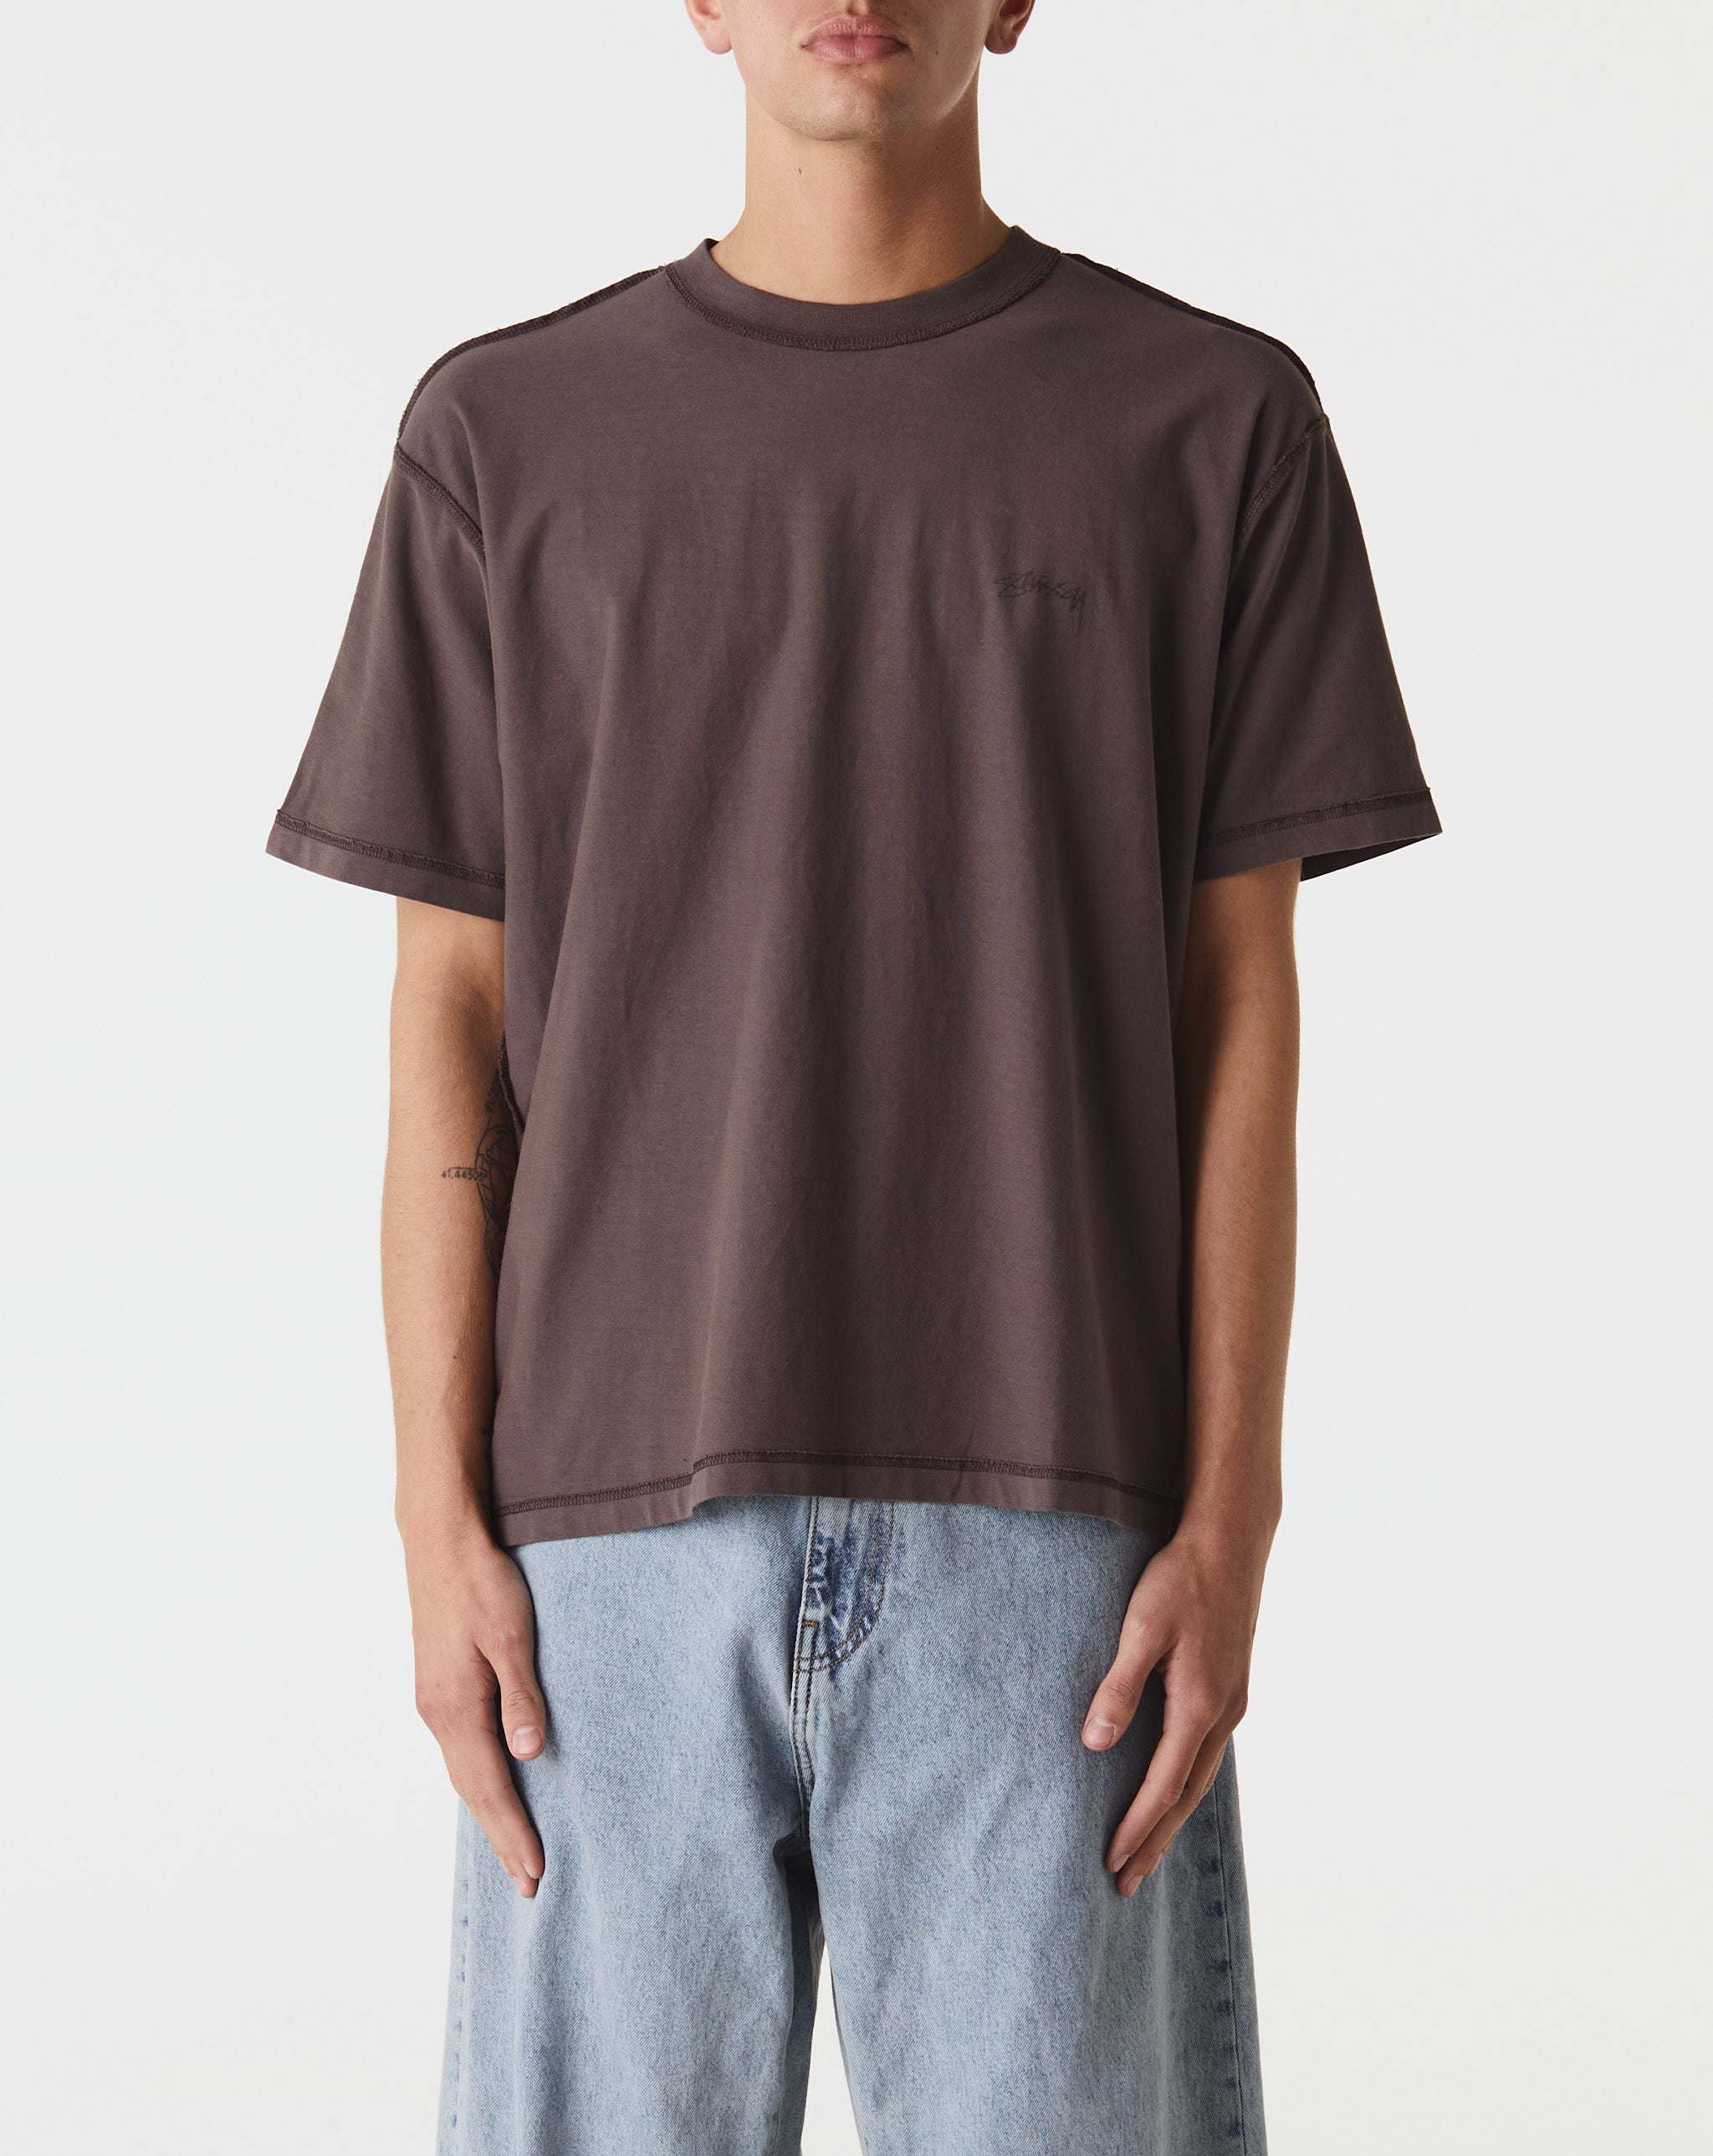 Stüssy Pigment Dyed inside Out T-Shirt  - XHIBITION